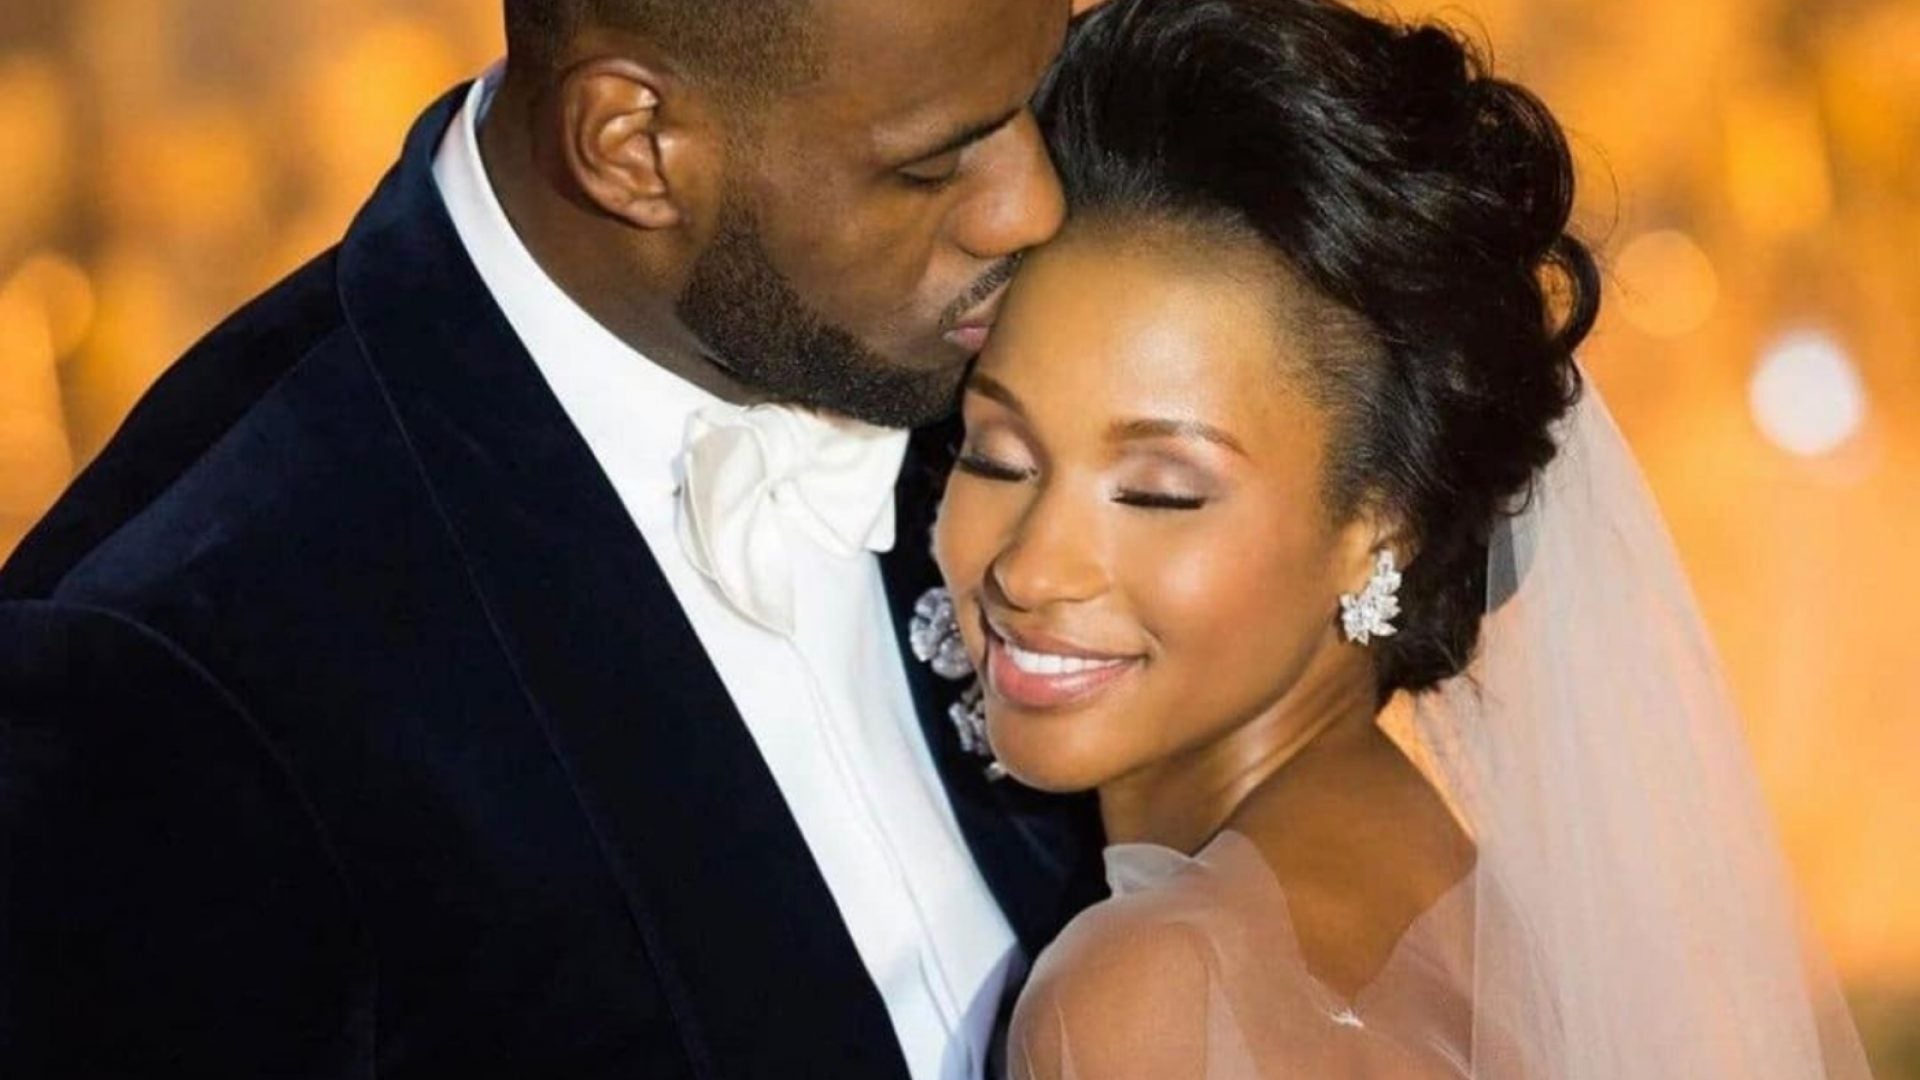 LeBron And Savannah James Celebrate Wedding Anniversary, Share Never-Before-Seen Photos From Their Big Day